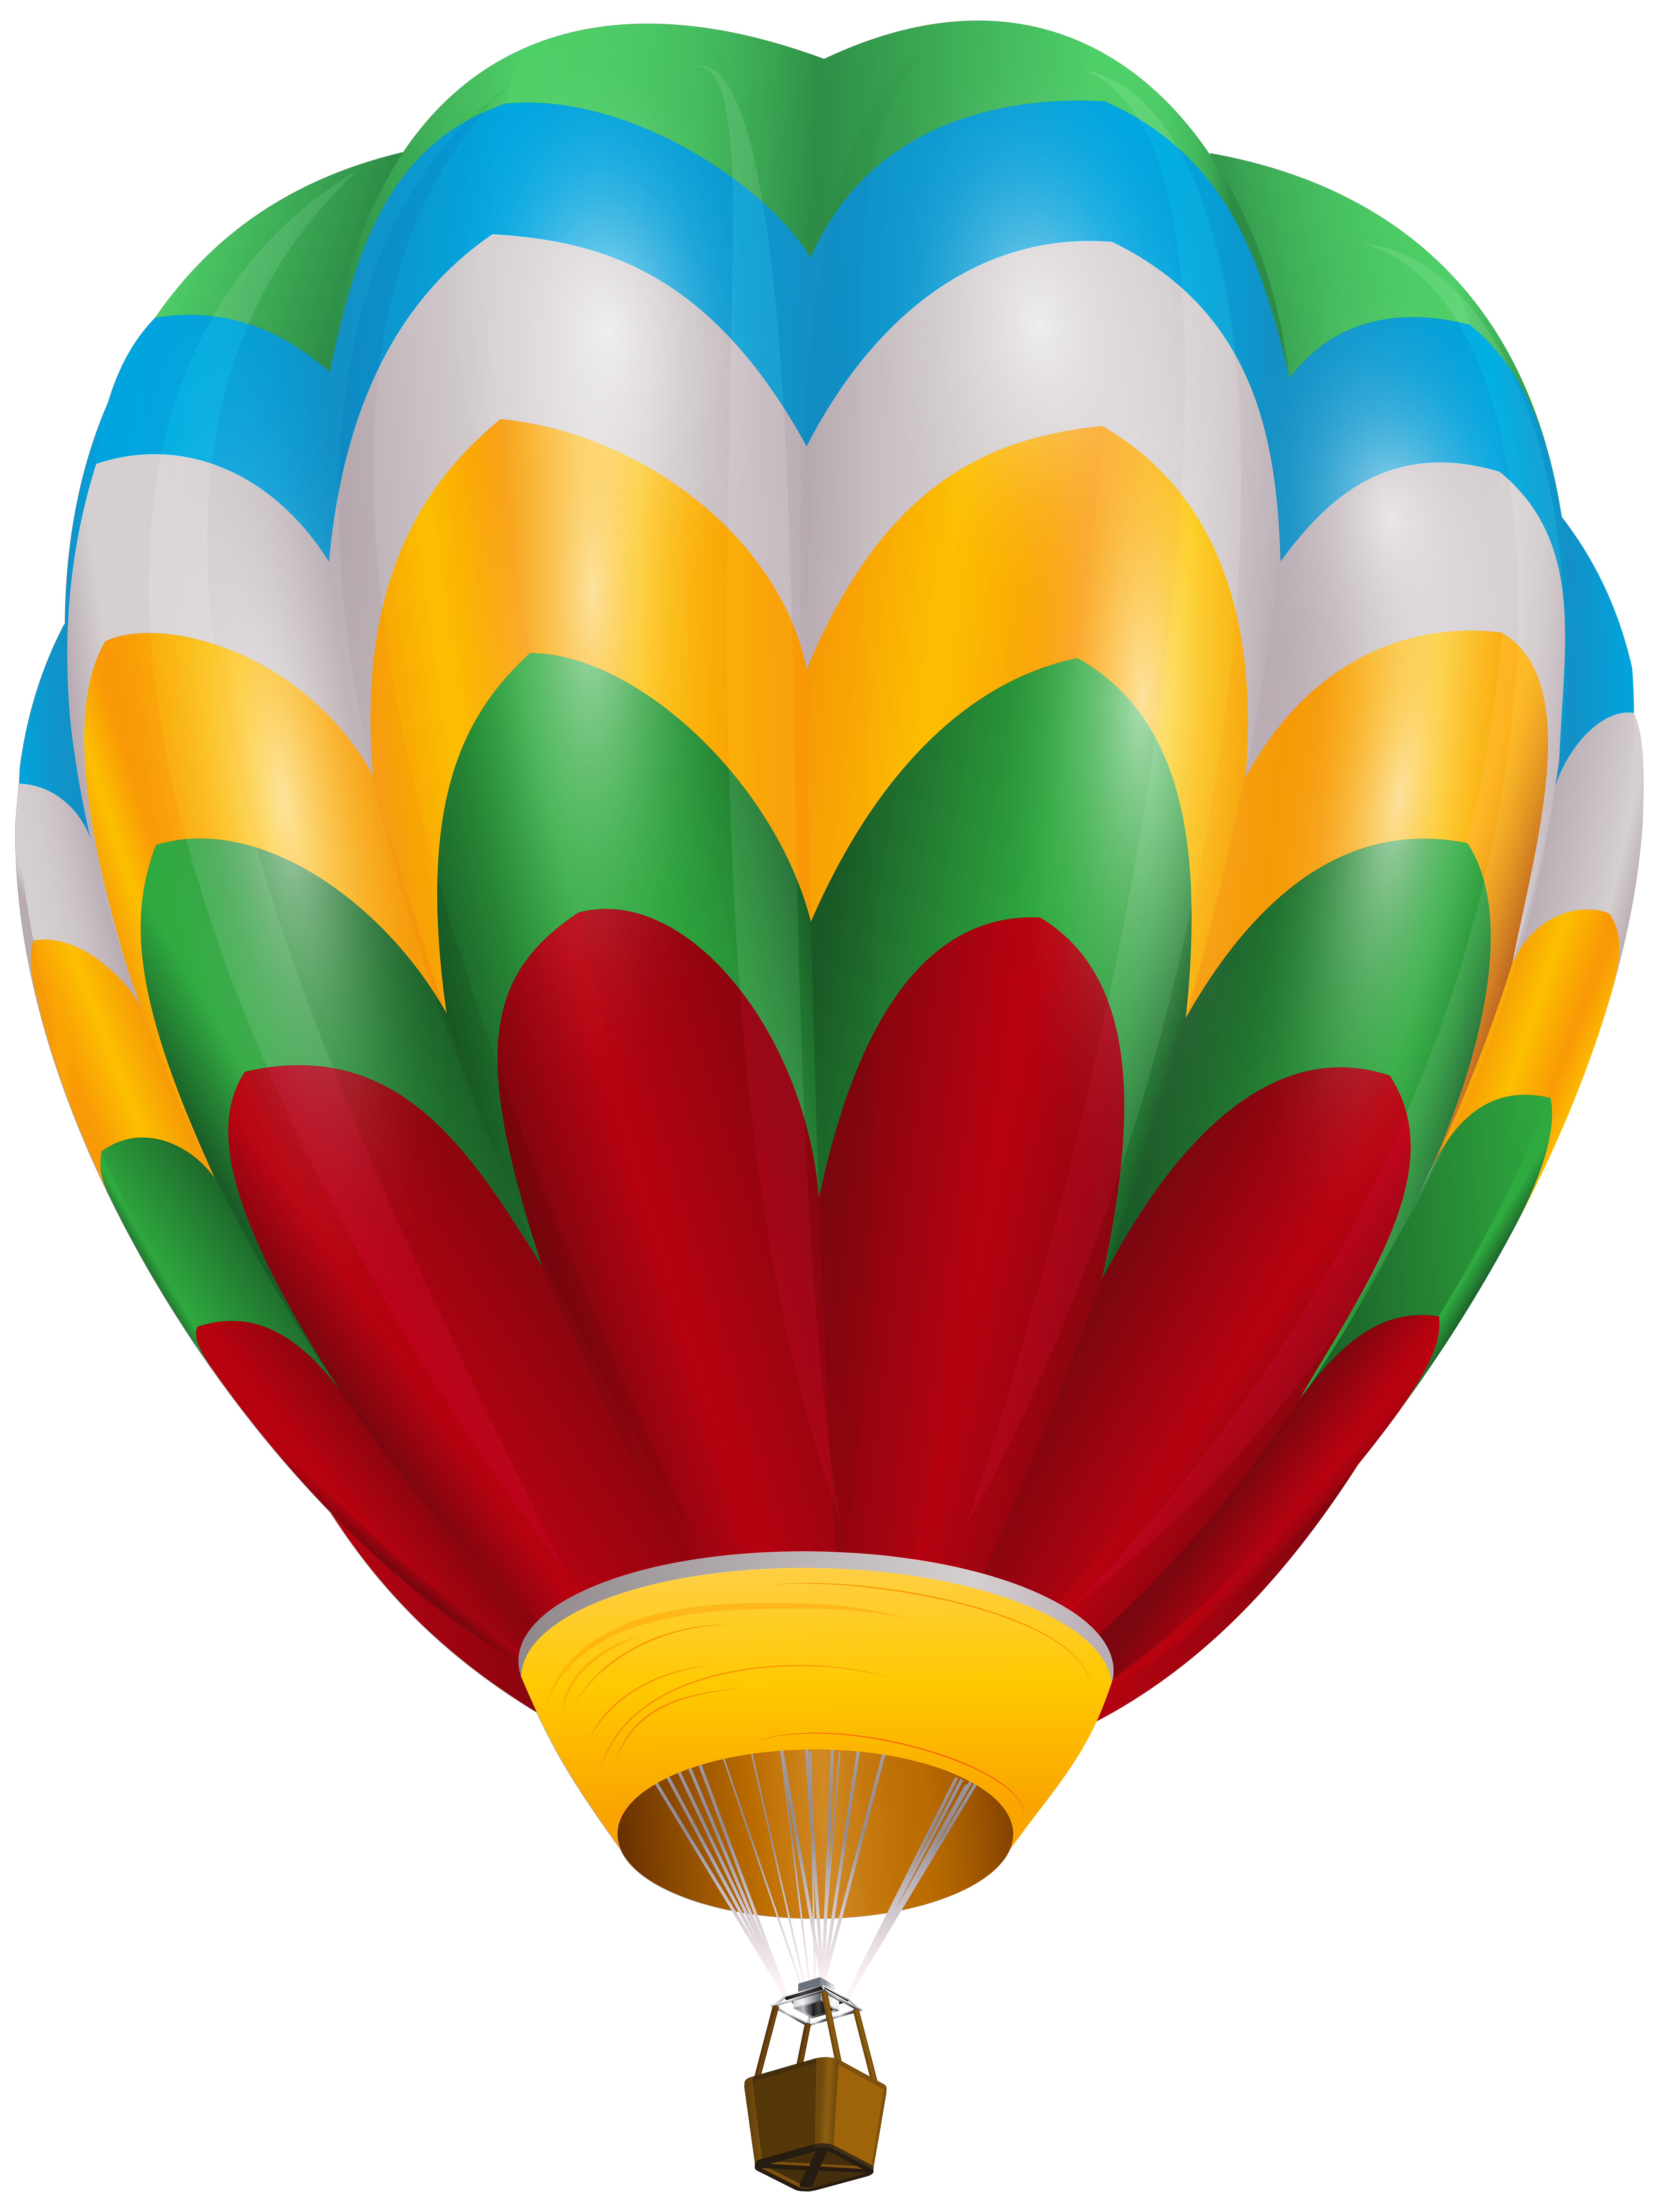 Hot Air Balloon Clip Art PNG Image | Gallery Yopriceville - High